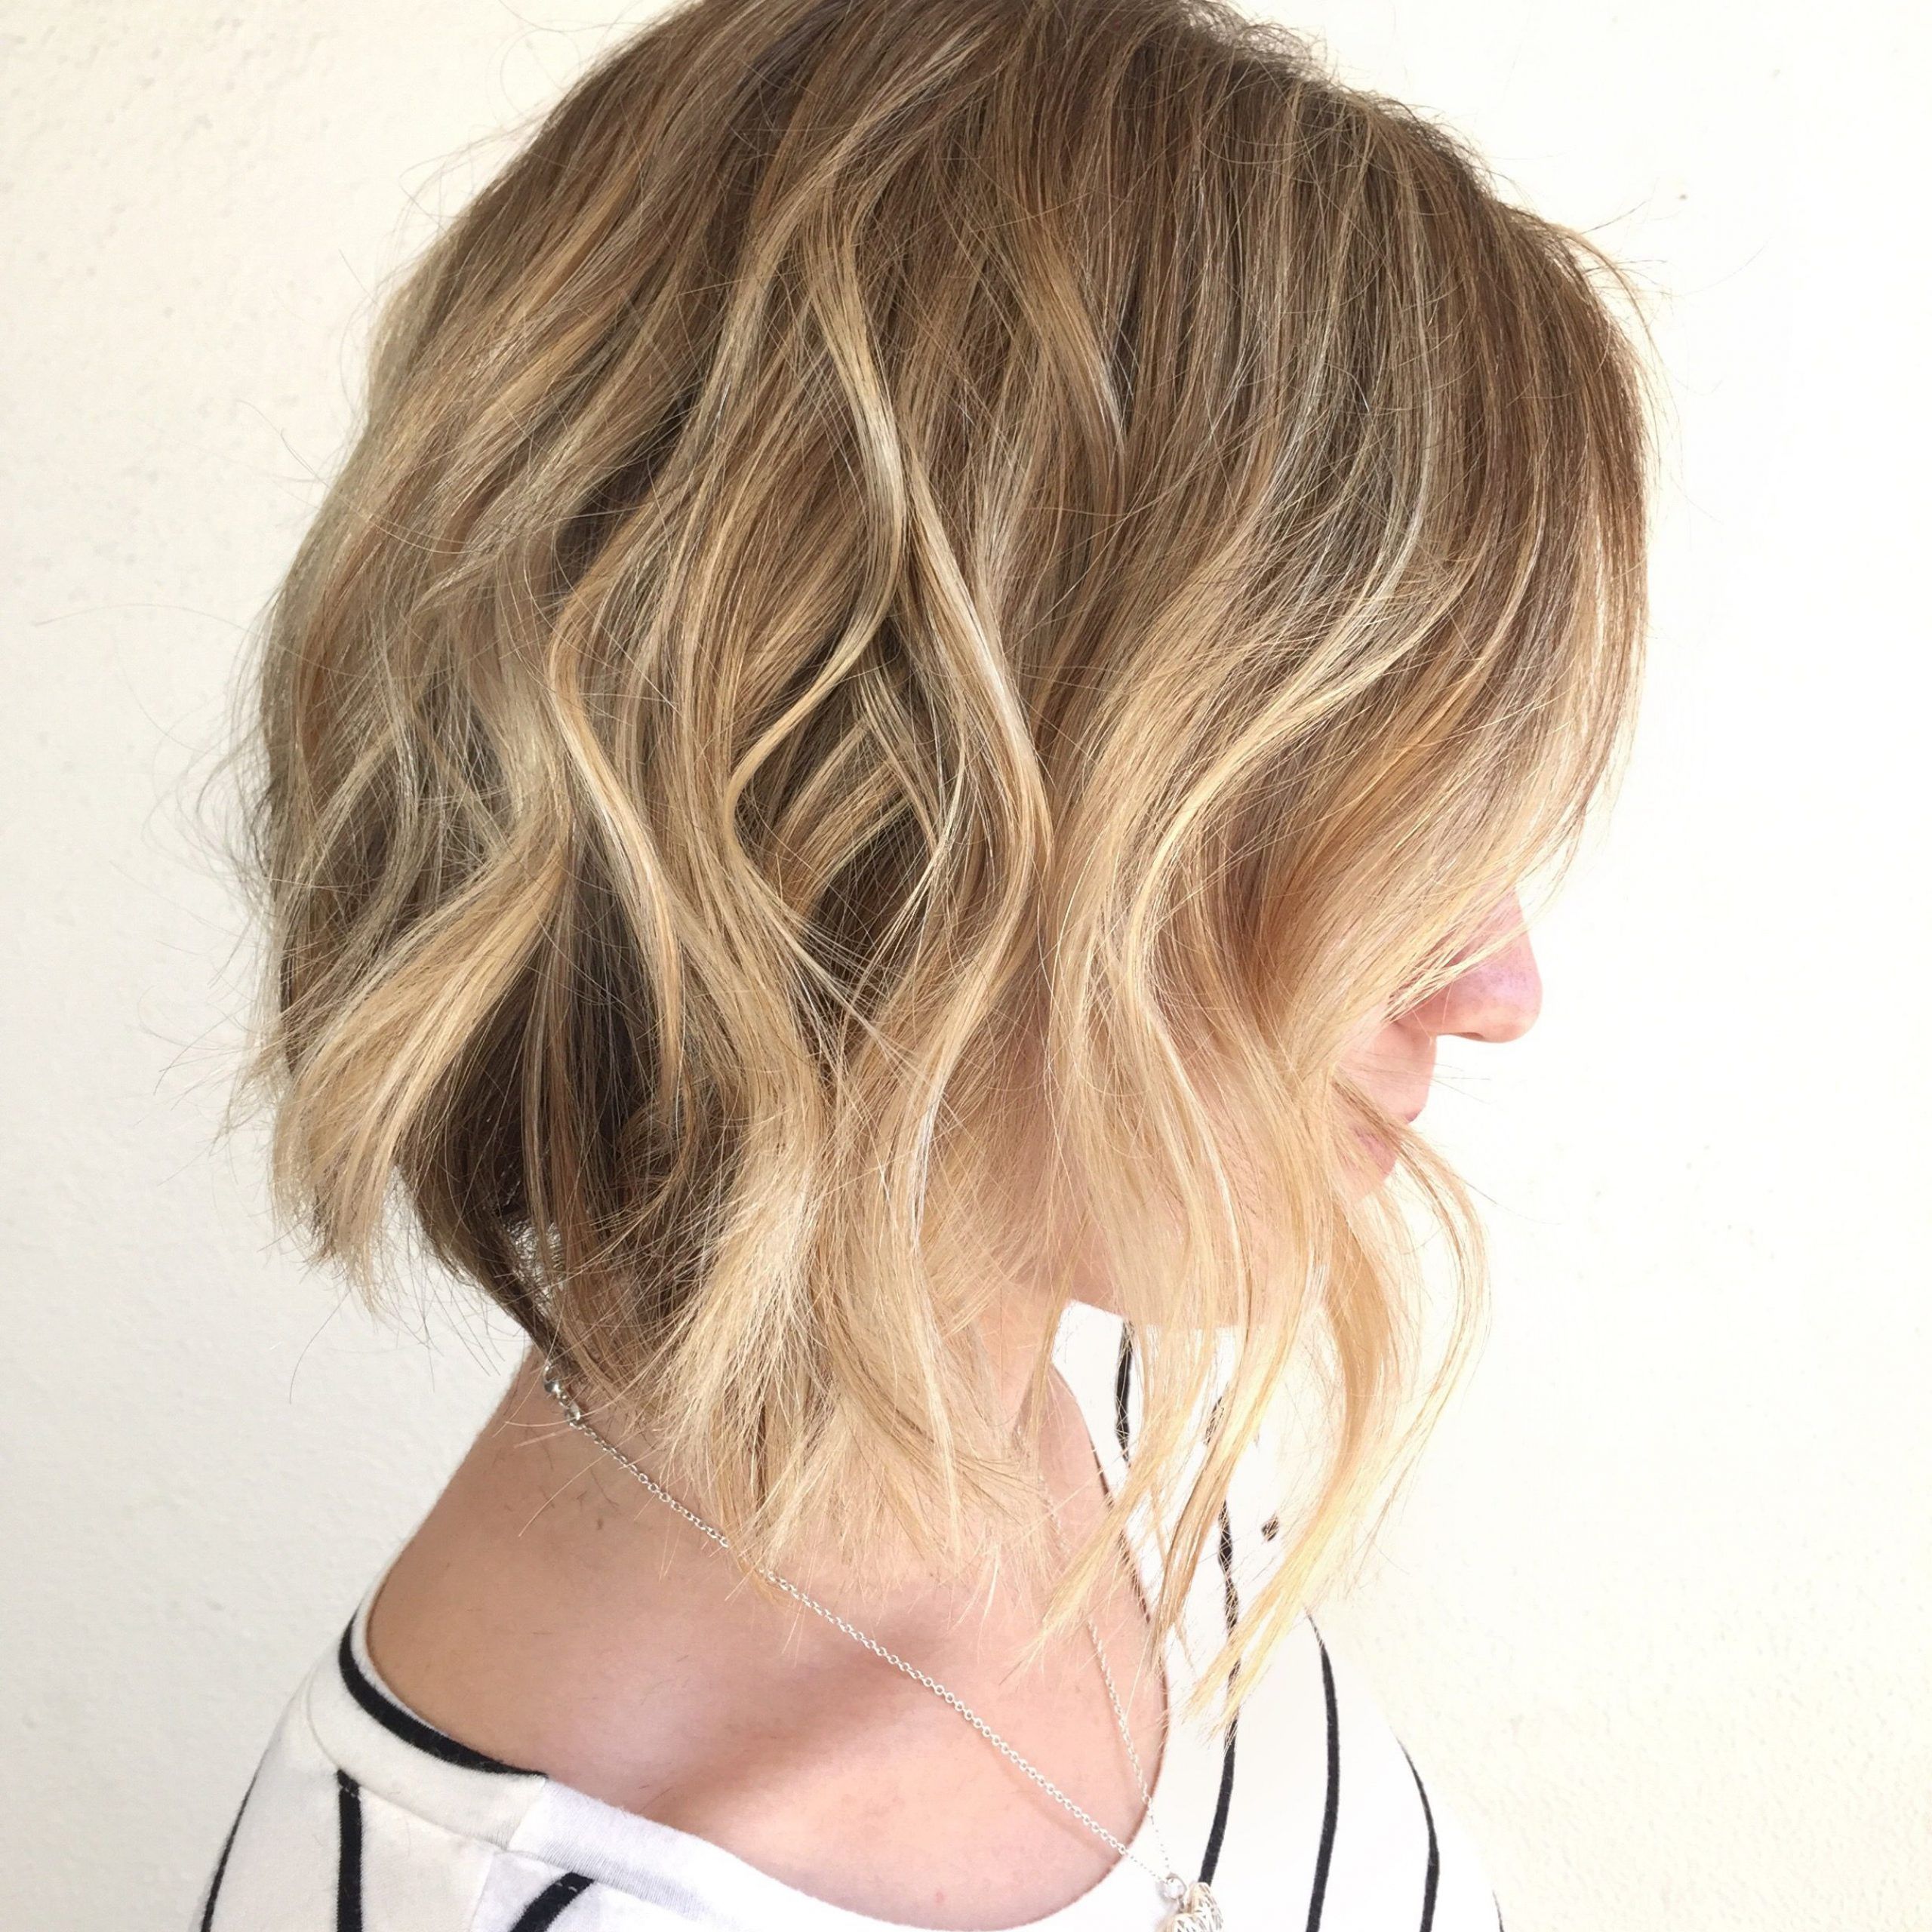 Natural Sandy Blonde Balayage, Short Hair, Textured Bob Within Short Textured Hairstyles With Balayage (View 18 of 20)